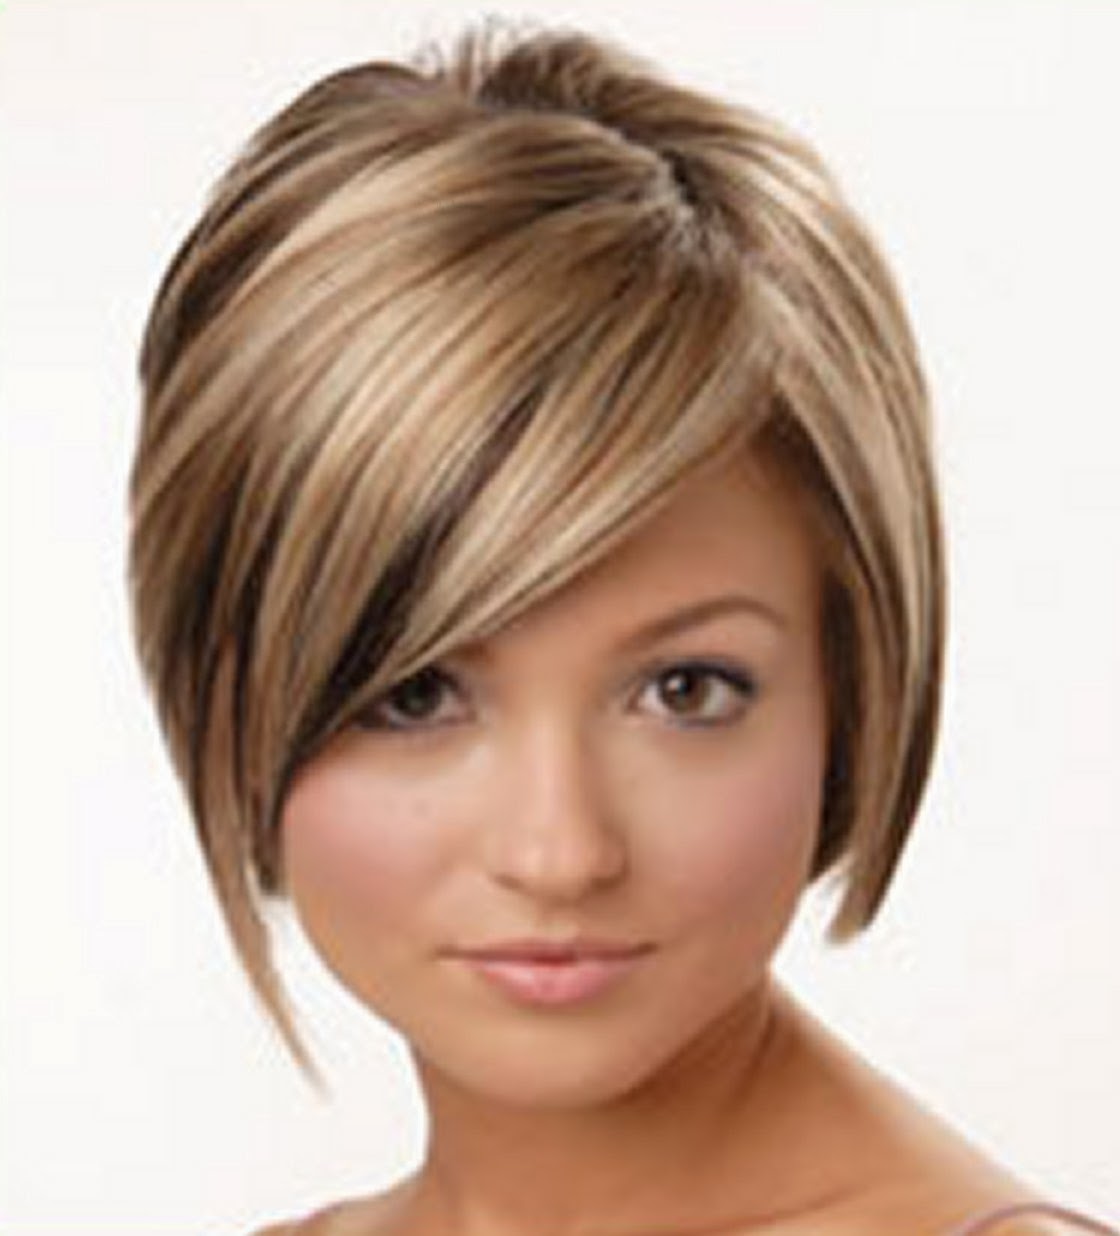 Long Haircuts For Fine Hair 2013  articles on long hairstyles, short hairstyles and curly hairstyles